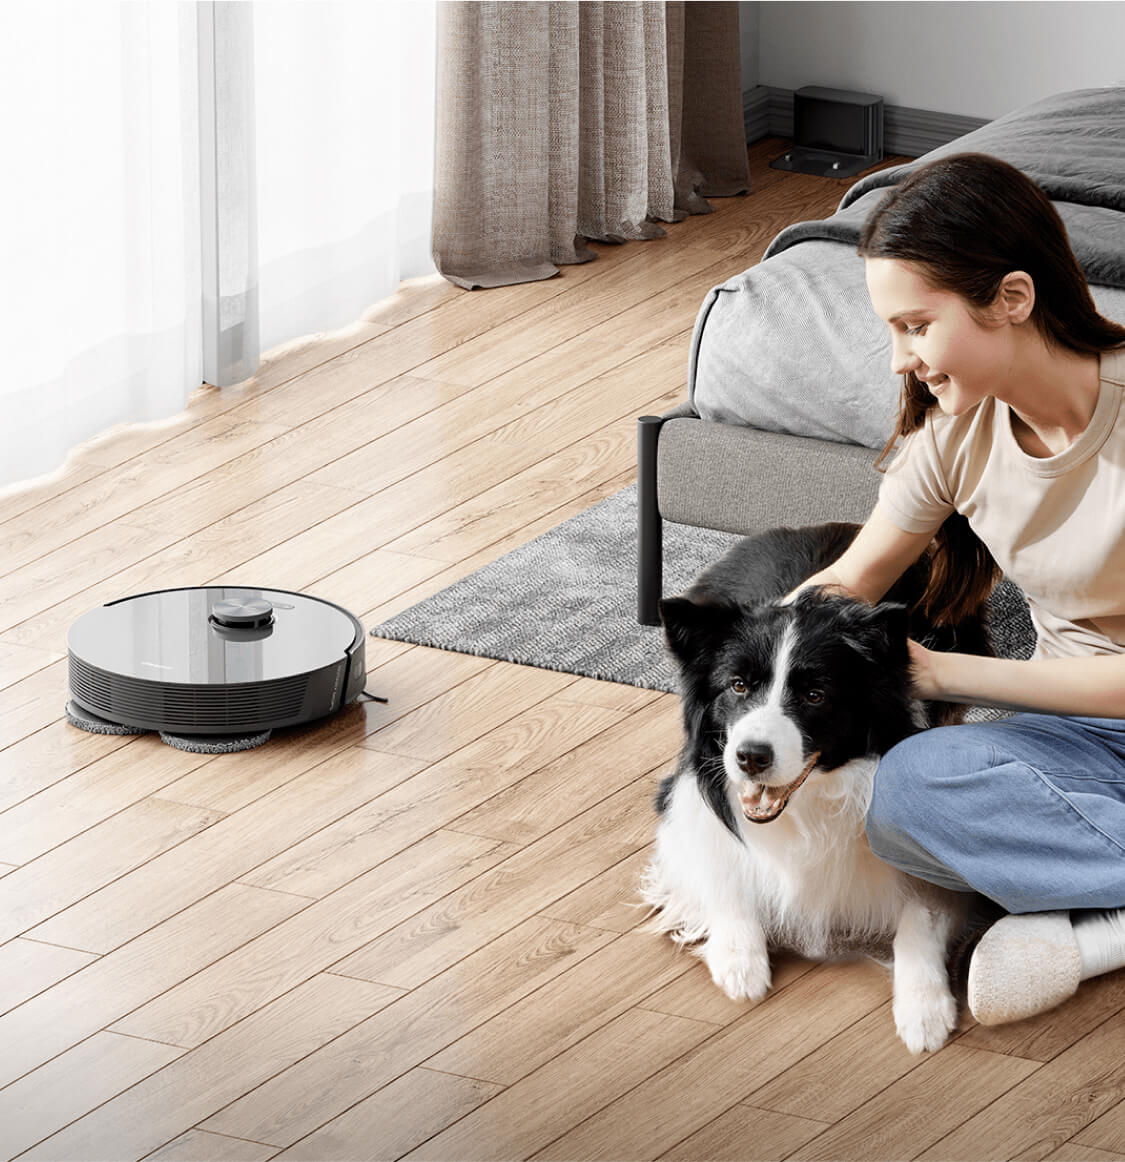 [RU] Dreame L10s Pro Robot Vacuum Cleaner for Home, Dual Rotary Mops, Mop  Raising, 5300Pa, 3D Obstacle Avoidance LDS Navigation